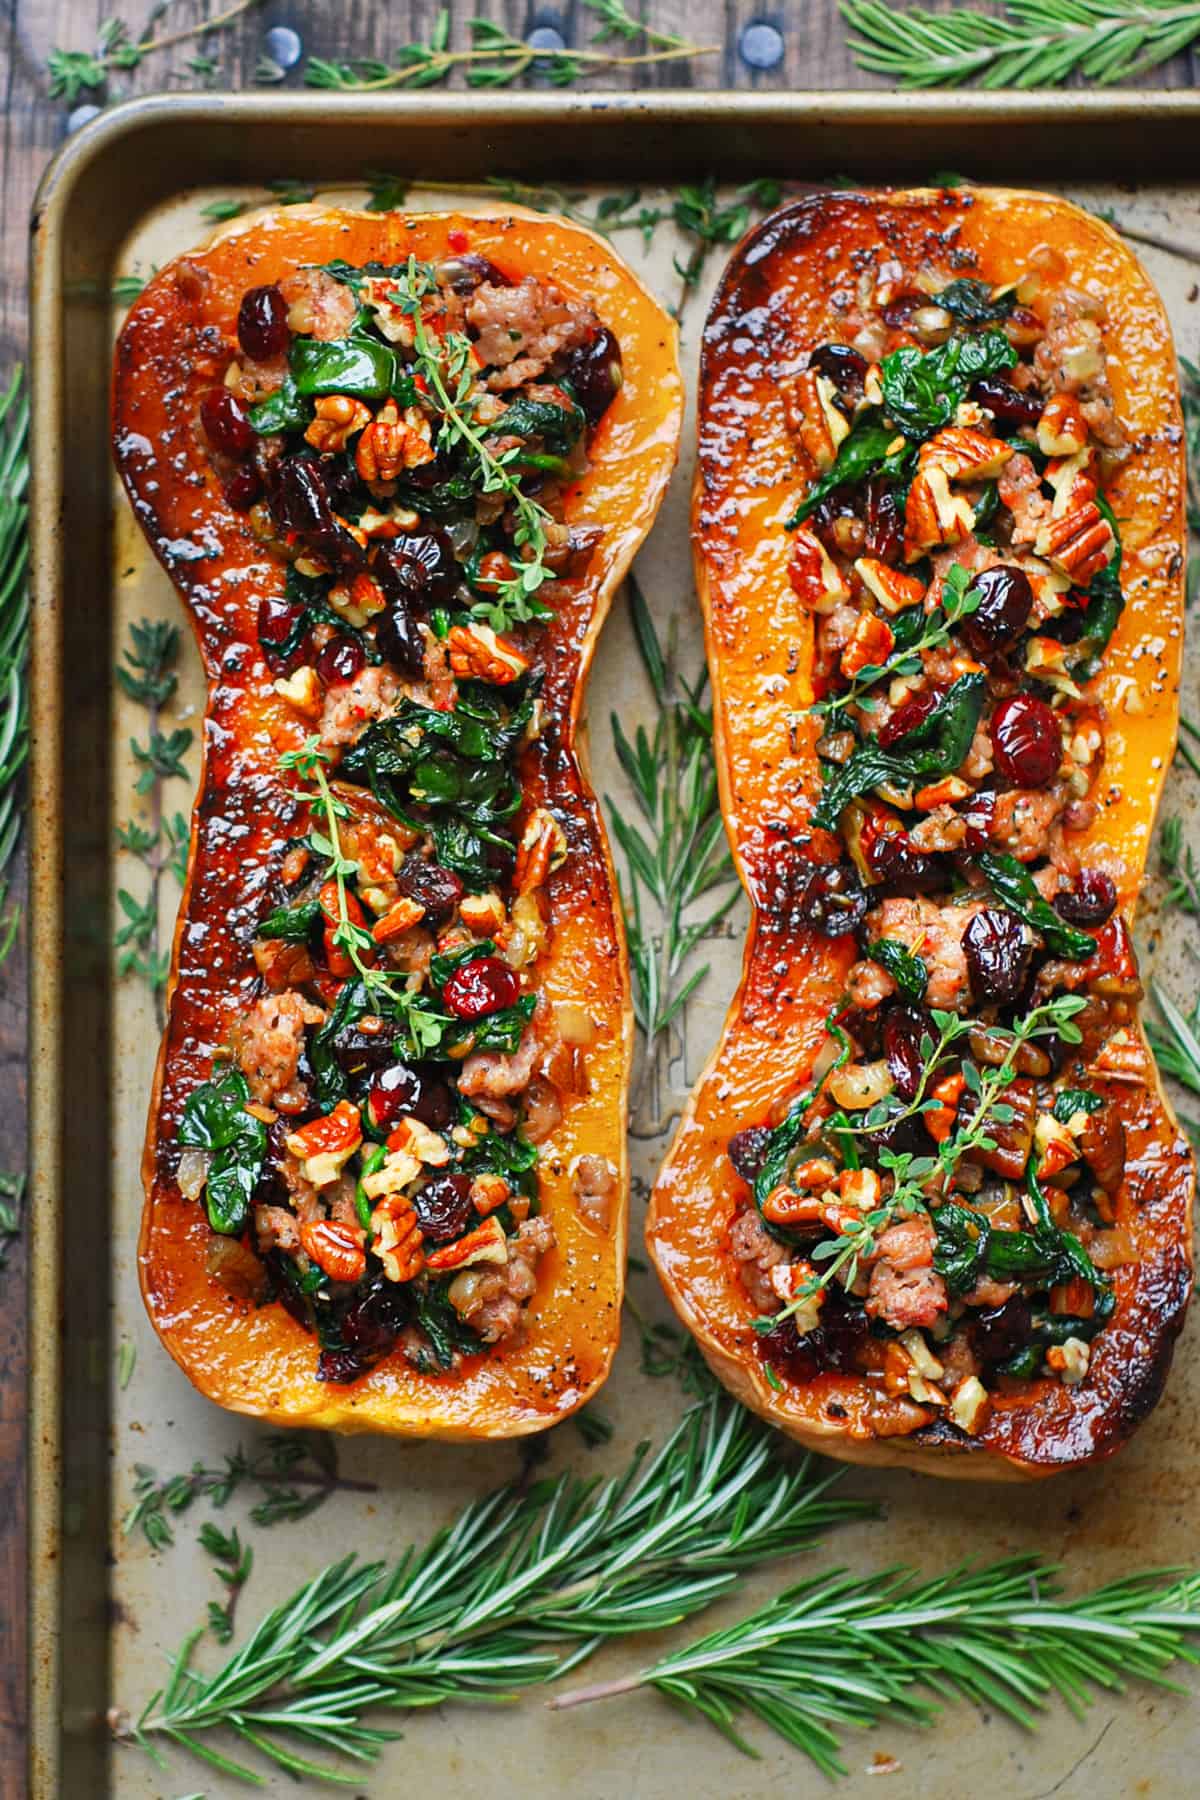 Sausage Stuffed Butternut Squash with Spinach, Pecans, and Cranberries on a baking sheet.